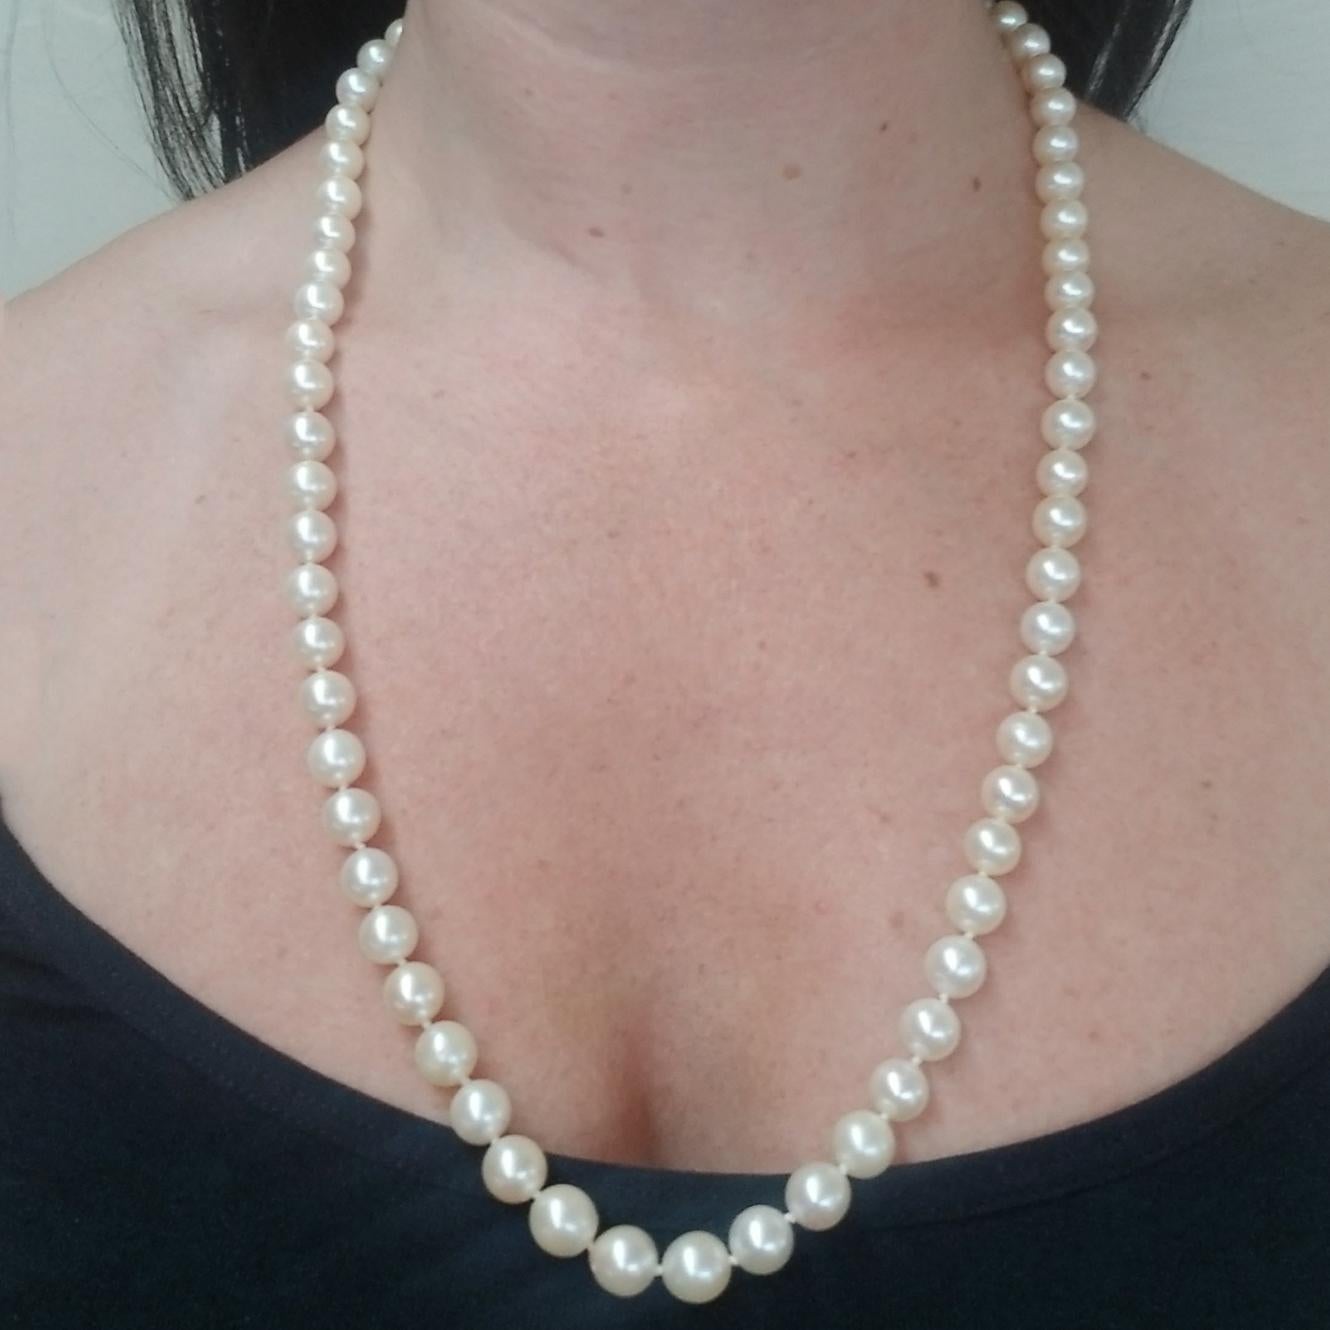 14 Karat Yellow Gold & 8mm-8.5mm Cultured Pearl Necklace Featuring 68 Off-White Round Pearls. 24 Inches Long with Ball Clasp.